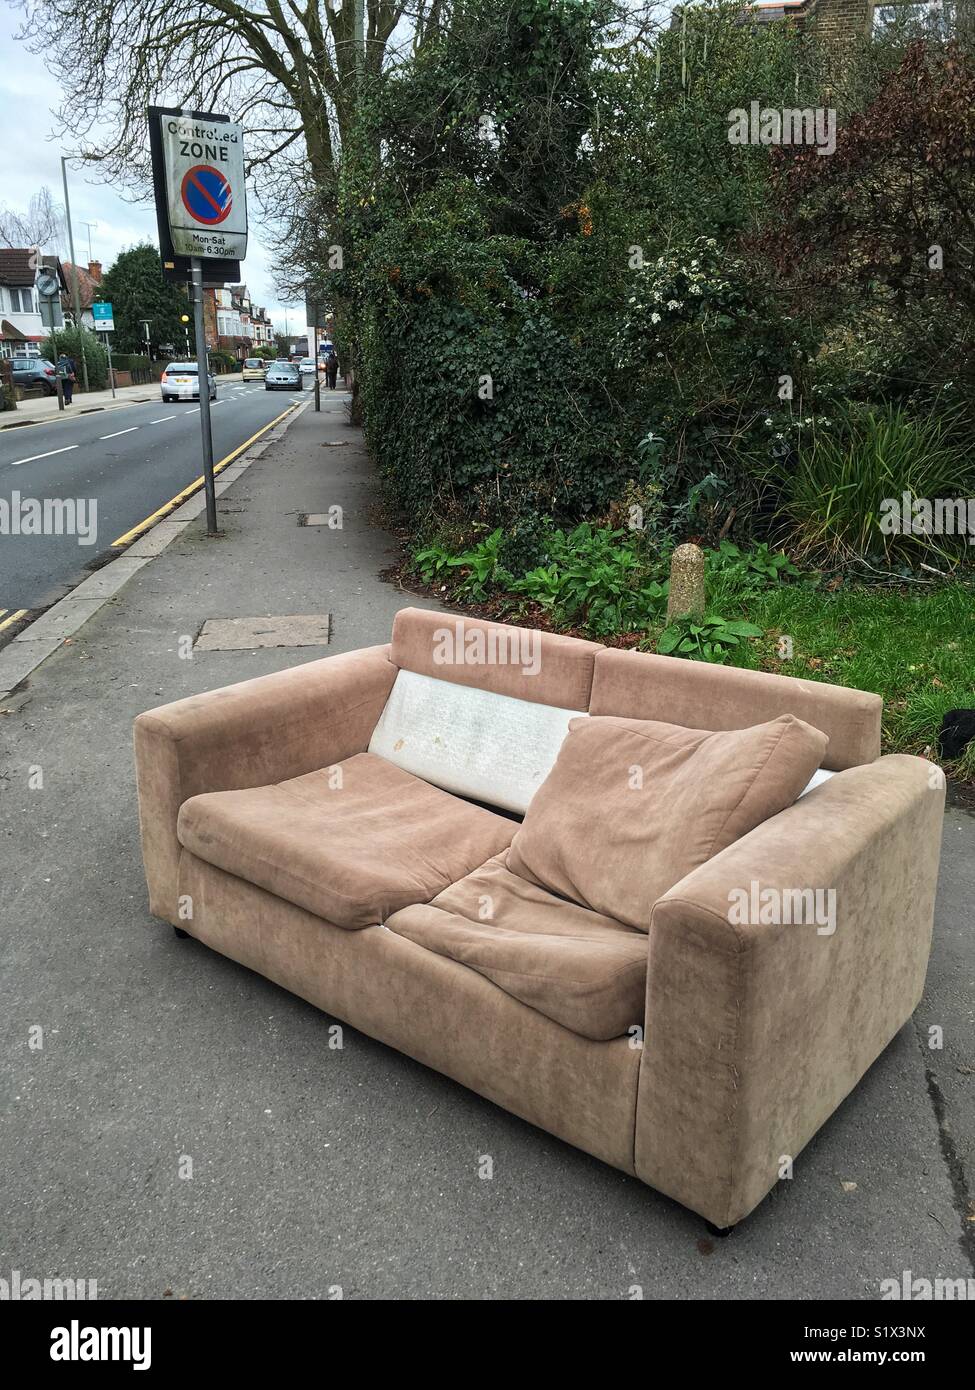 A sofa dumped on the pavement in London, England Stock Photo